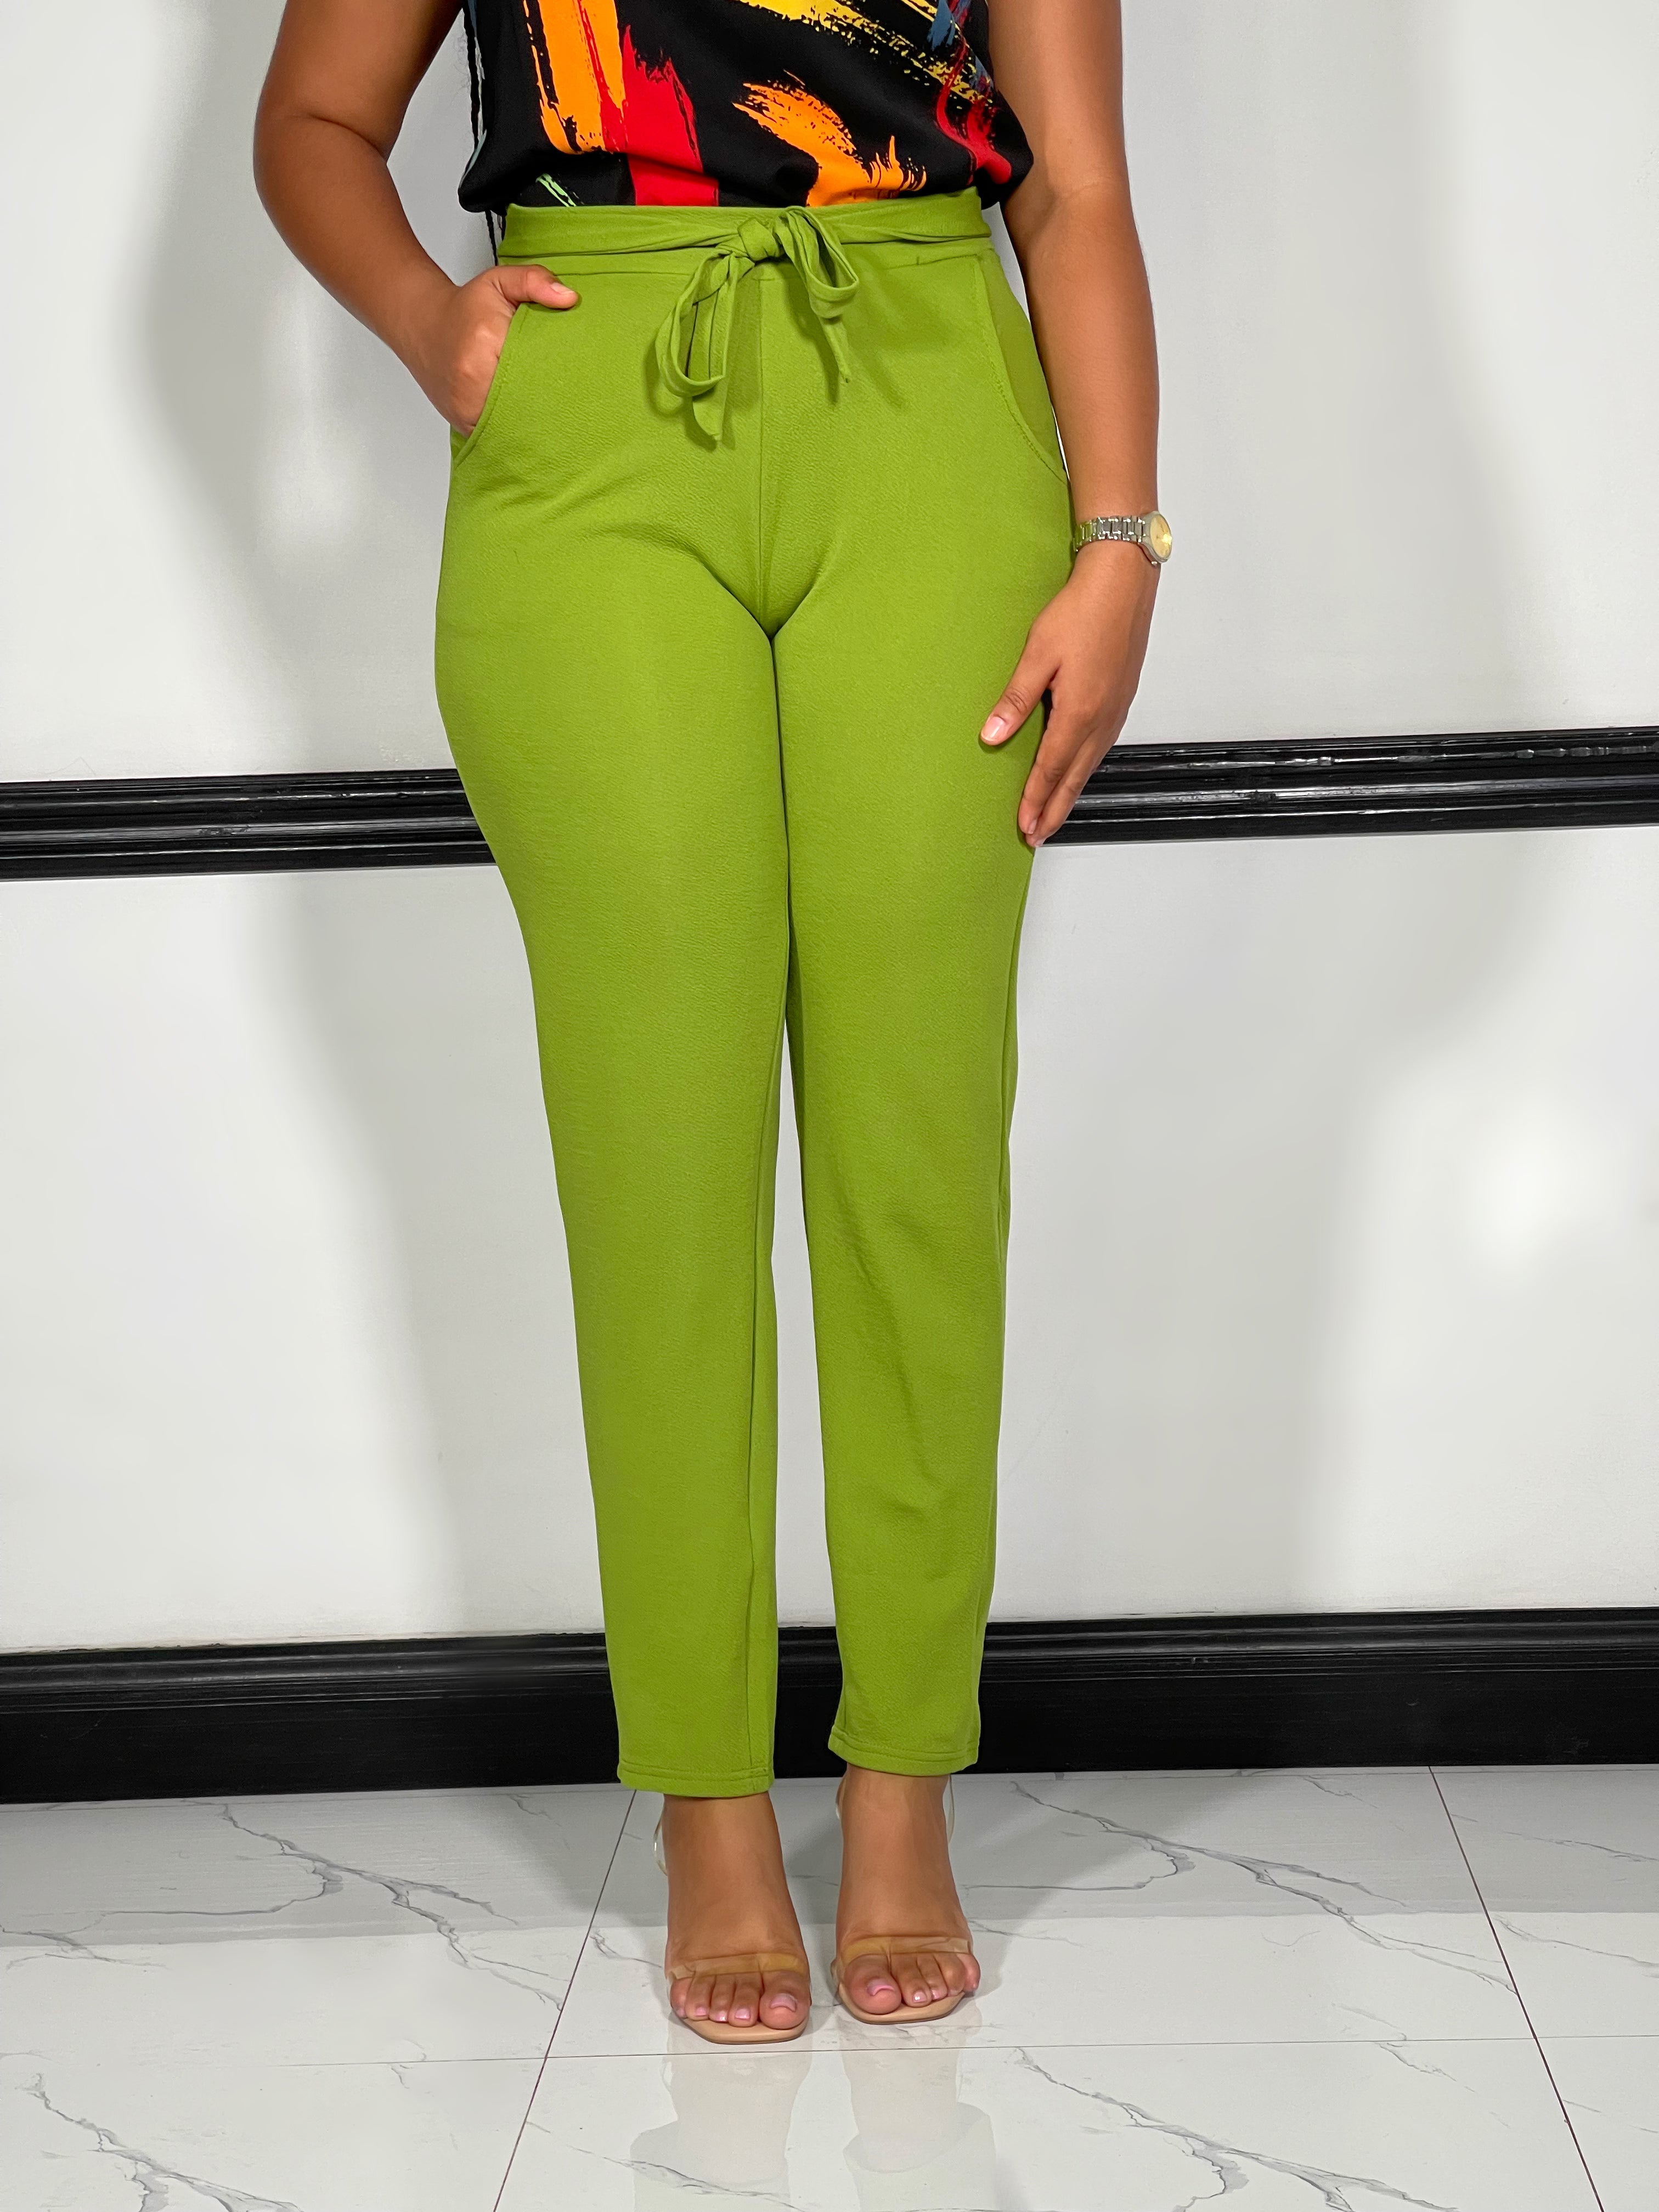 Knot Your Girl Pants-Vintage Green - Impoze Style™